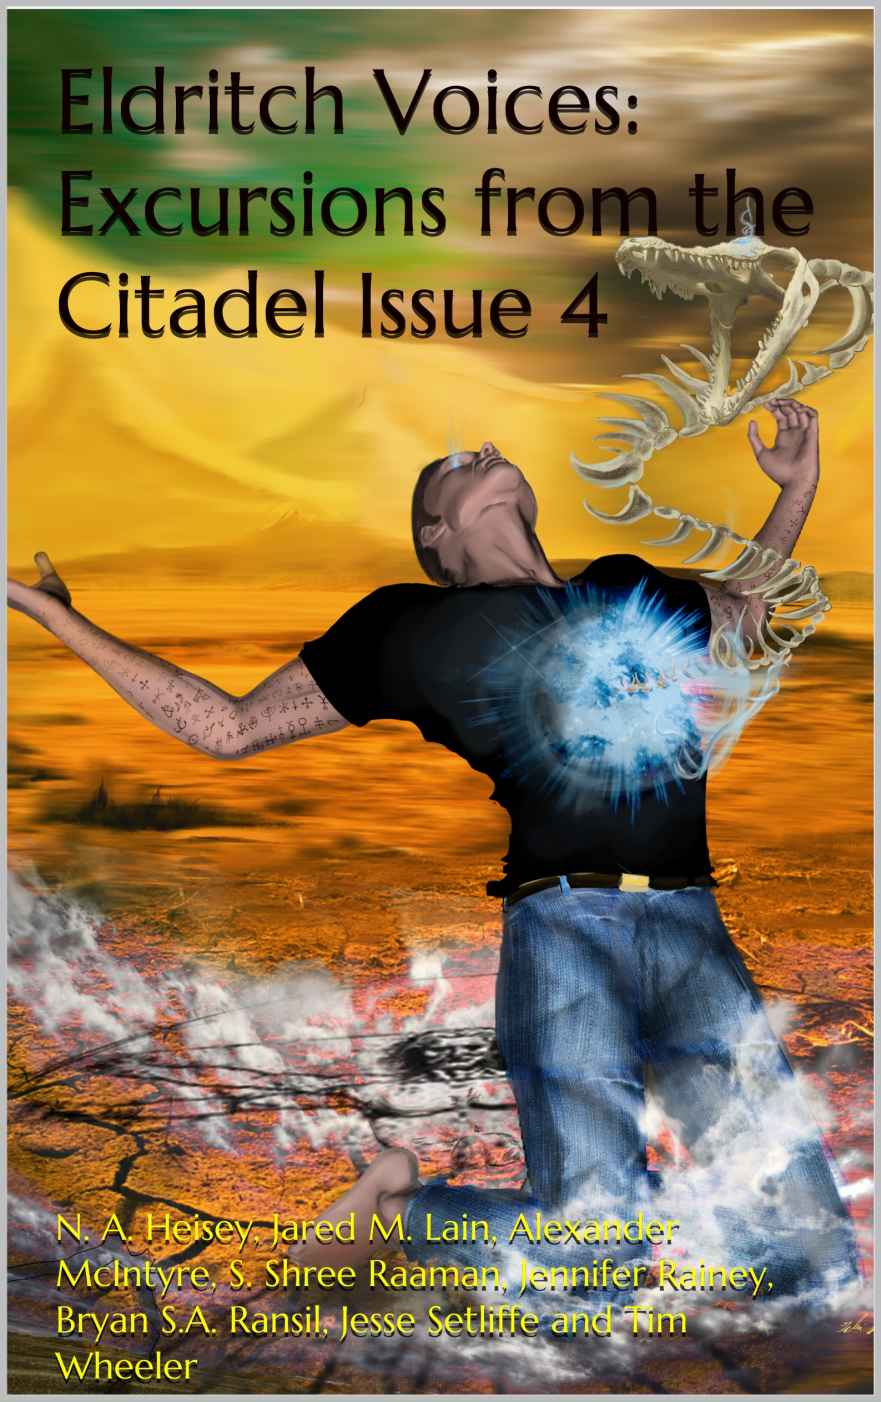 Excursions from the Citadel Issue 4: Eldritch Voices